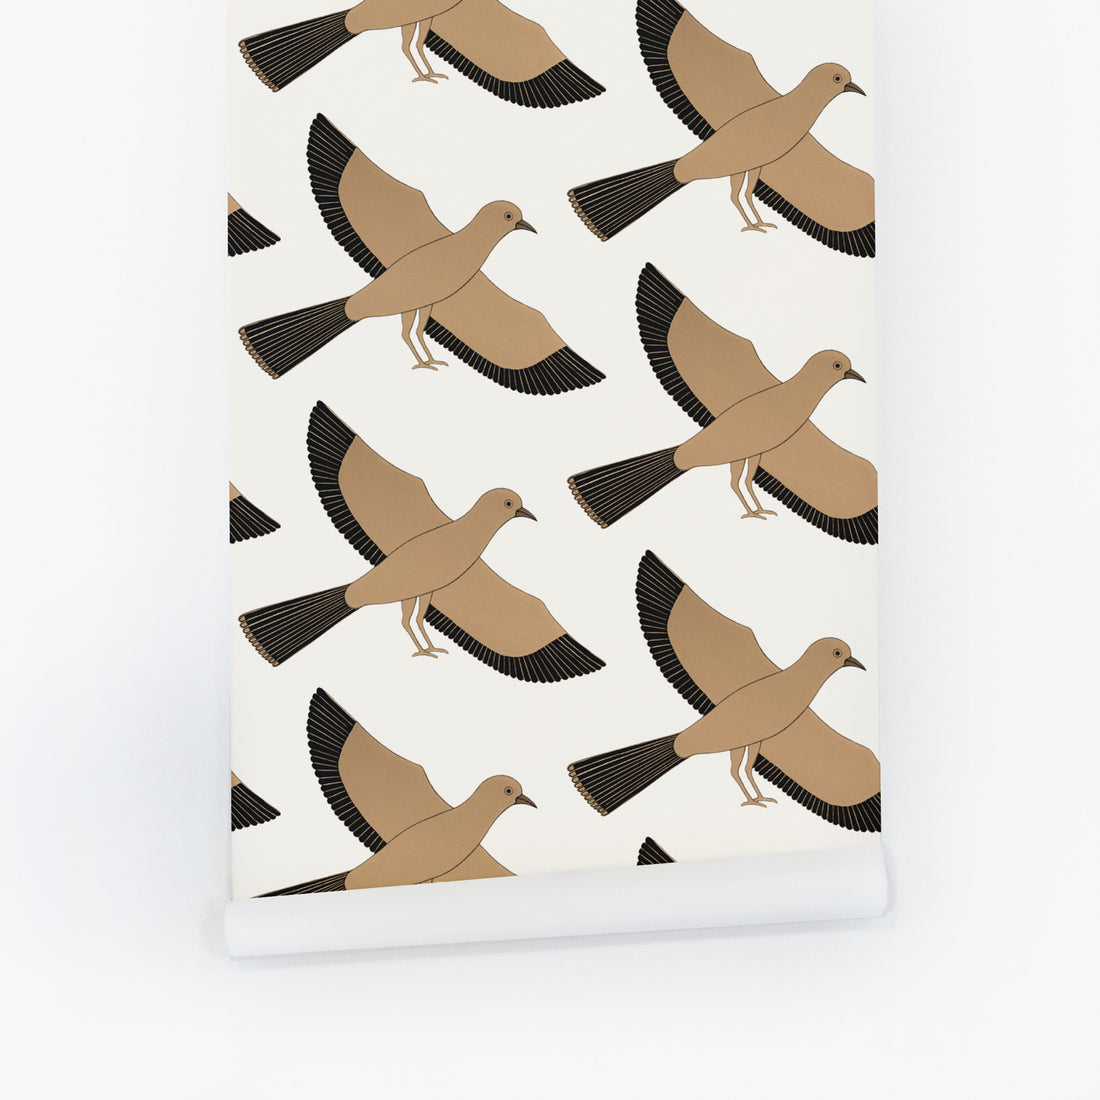 Mid-century modern pigeon design wallpaper in neutral colors